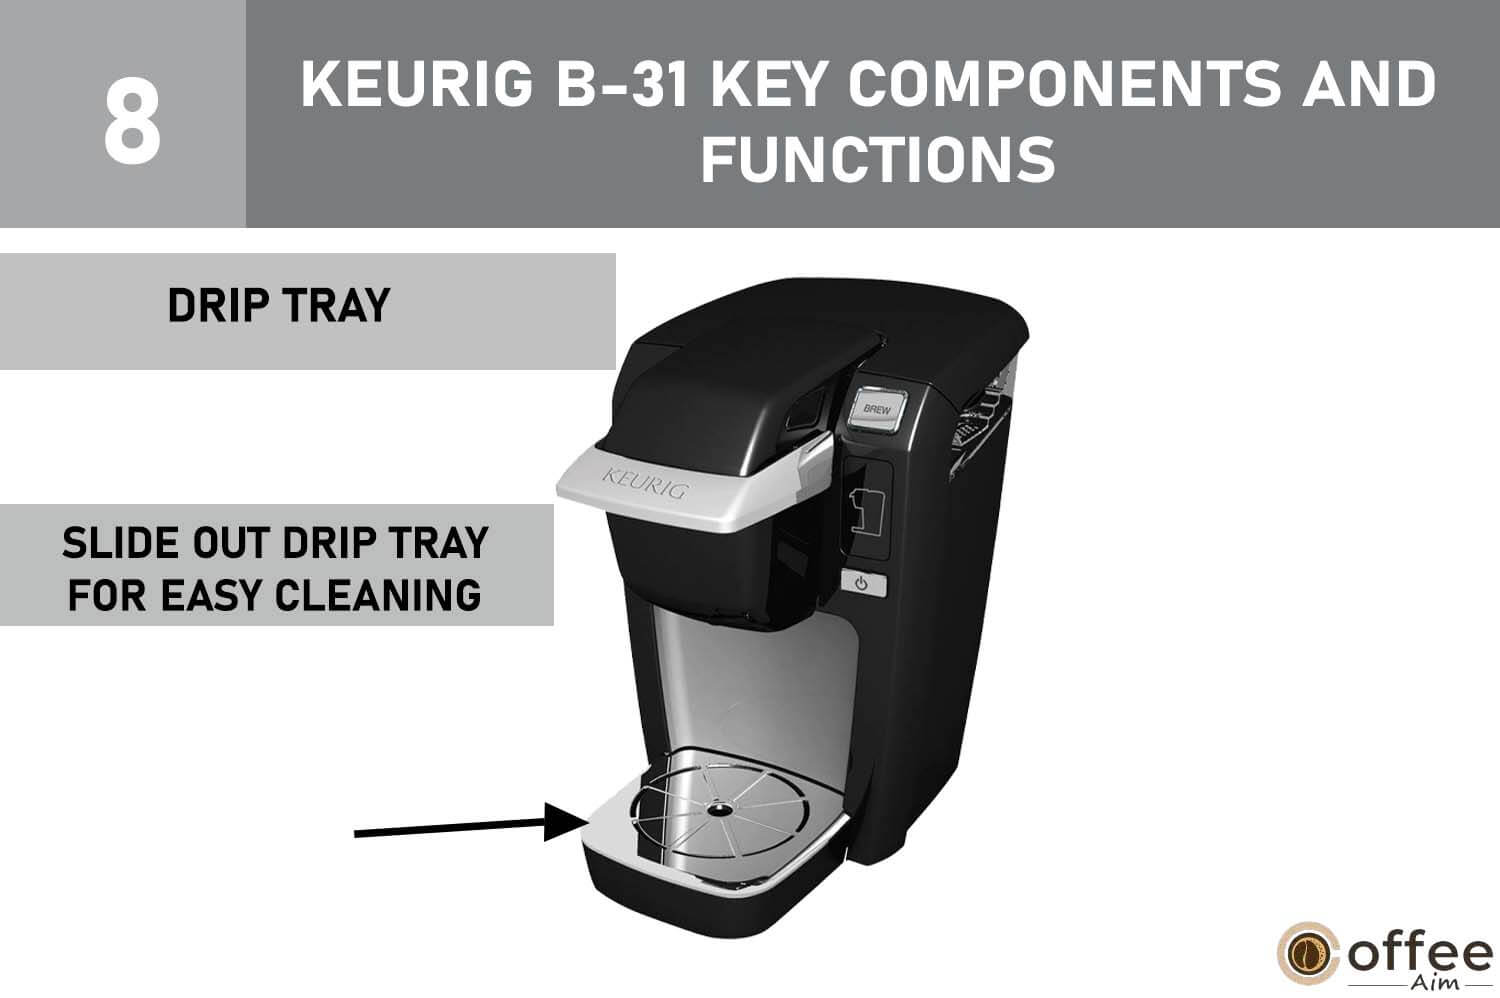 This image depicts the "Drip Tray" component of the Keurig B-31 coffee maker, providing visual reference for the "How To Use Keurig B-31" article.